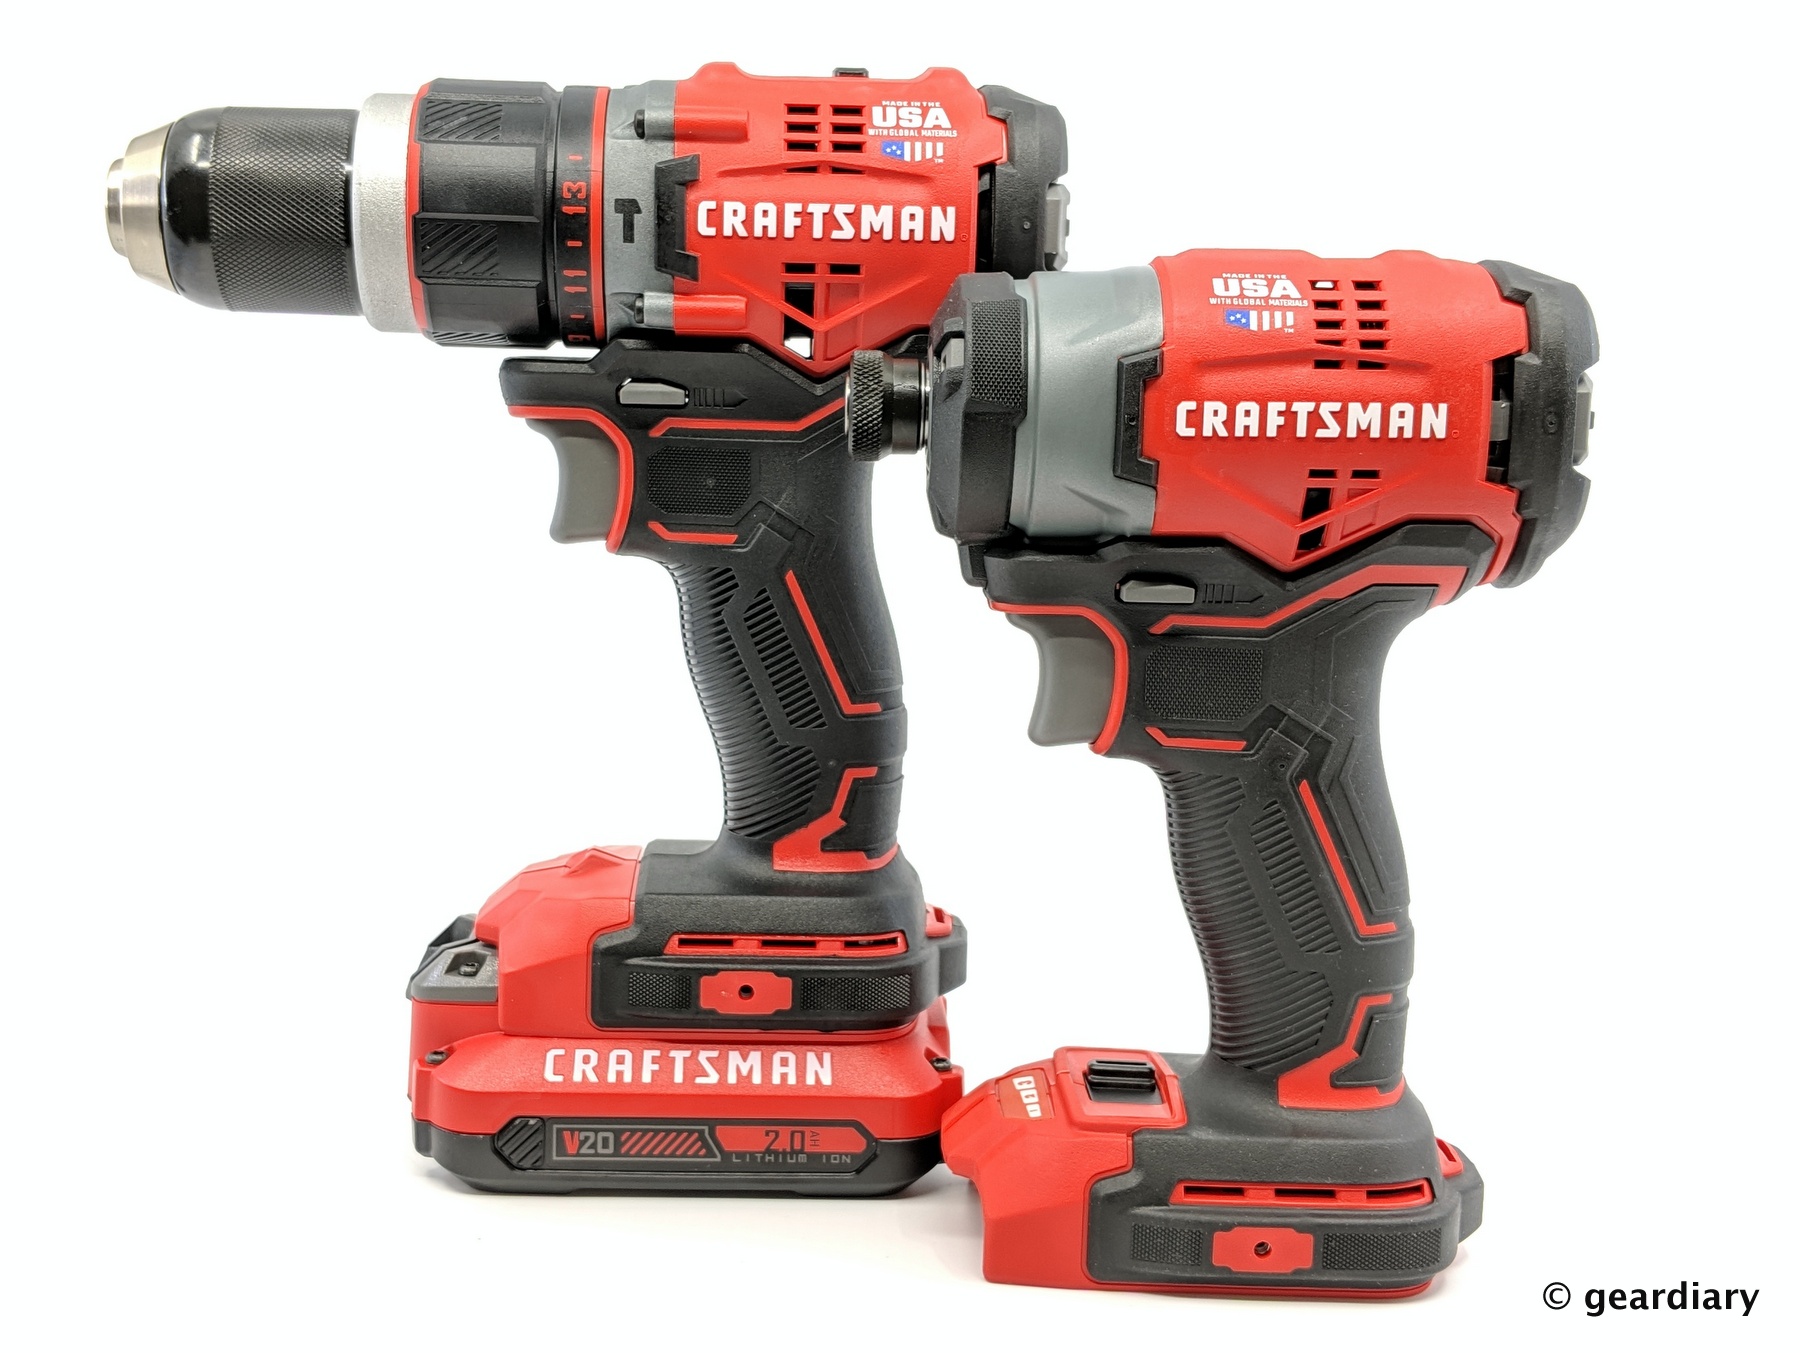 CRAFTSMAN V20 MAX Cordless Drill and Impact Driver, Power Tool Combo Kit  with Batteries and Charger